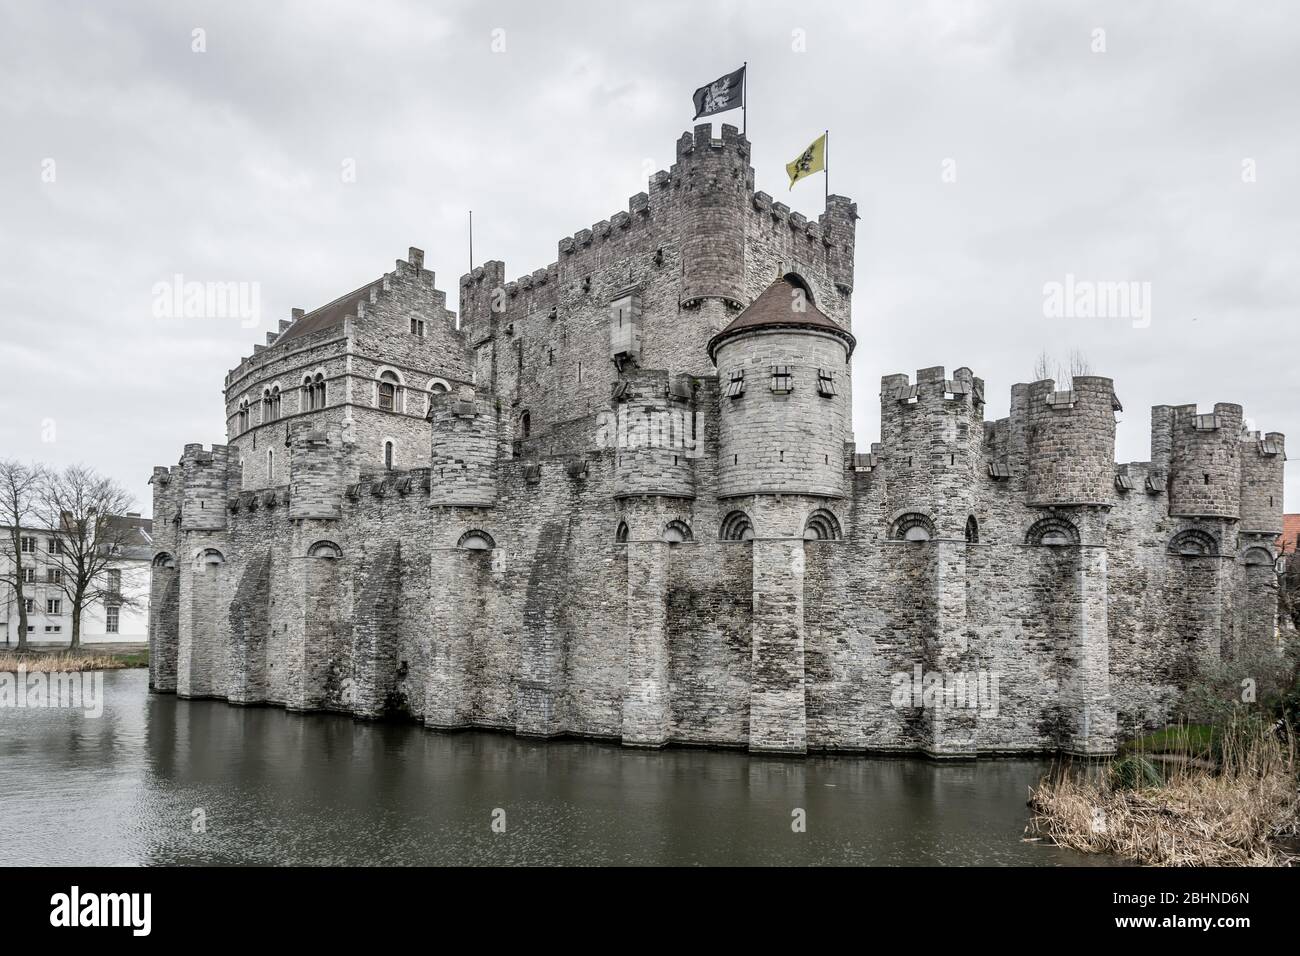 Medieval castle Gravensteen (Castle of the Counts) in Gent, Belgium. Present castle was built in 1180 by count Philip of Alsace. Stock Photo